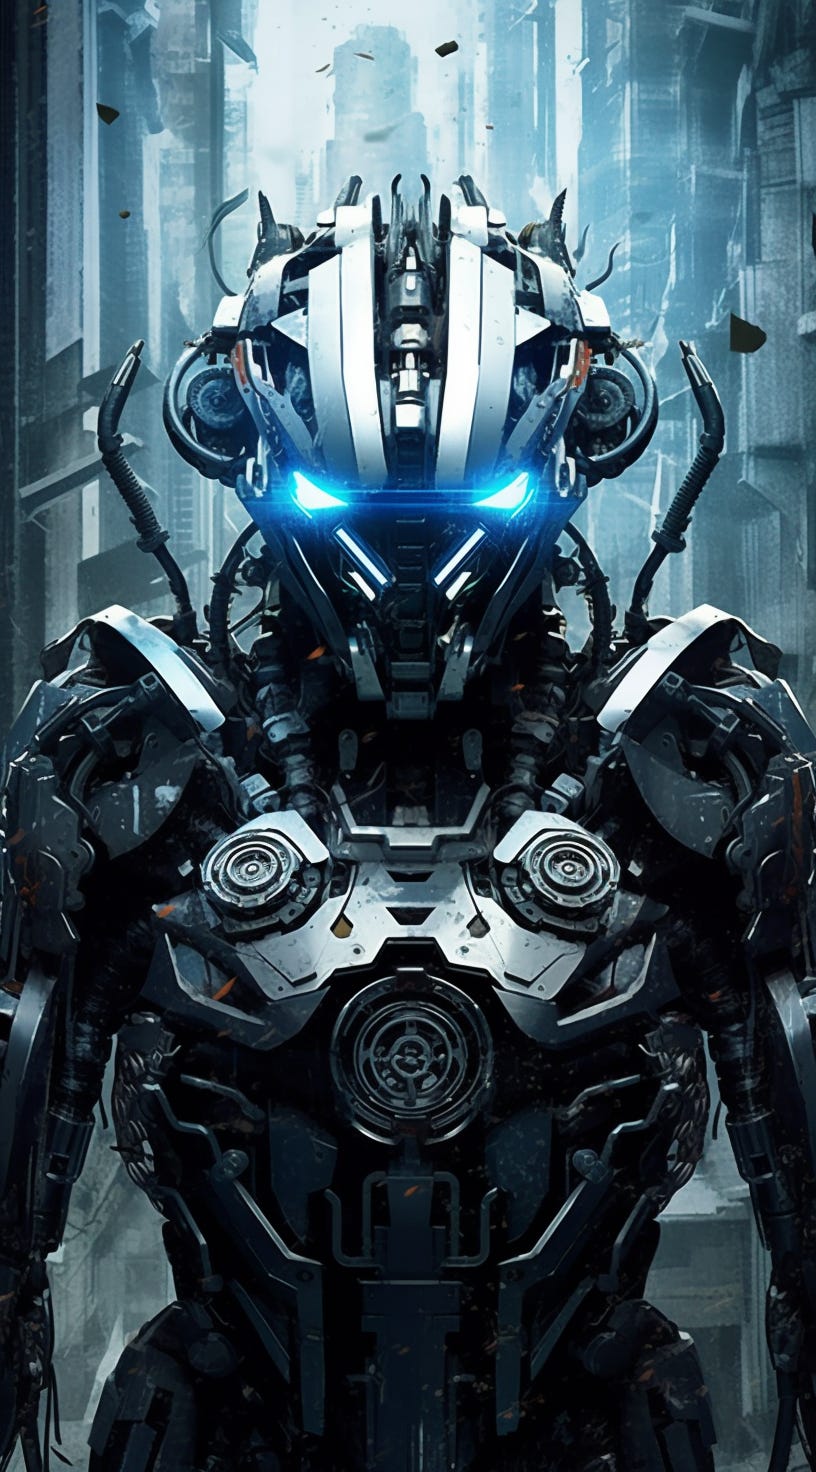 a black robot is standing on the floor, in the style of precisionist art, white light gray and blue, friendly face, large lenses for eyes, blue light in the eyes, steel nose, cyberpunk manga, narrow rotor waist, ultra hd, Exposed circuit boards and gears, white blue and gray, emphasizes emotion over realism